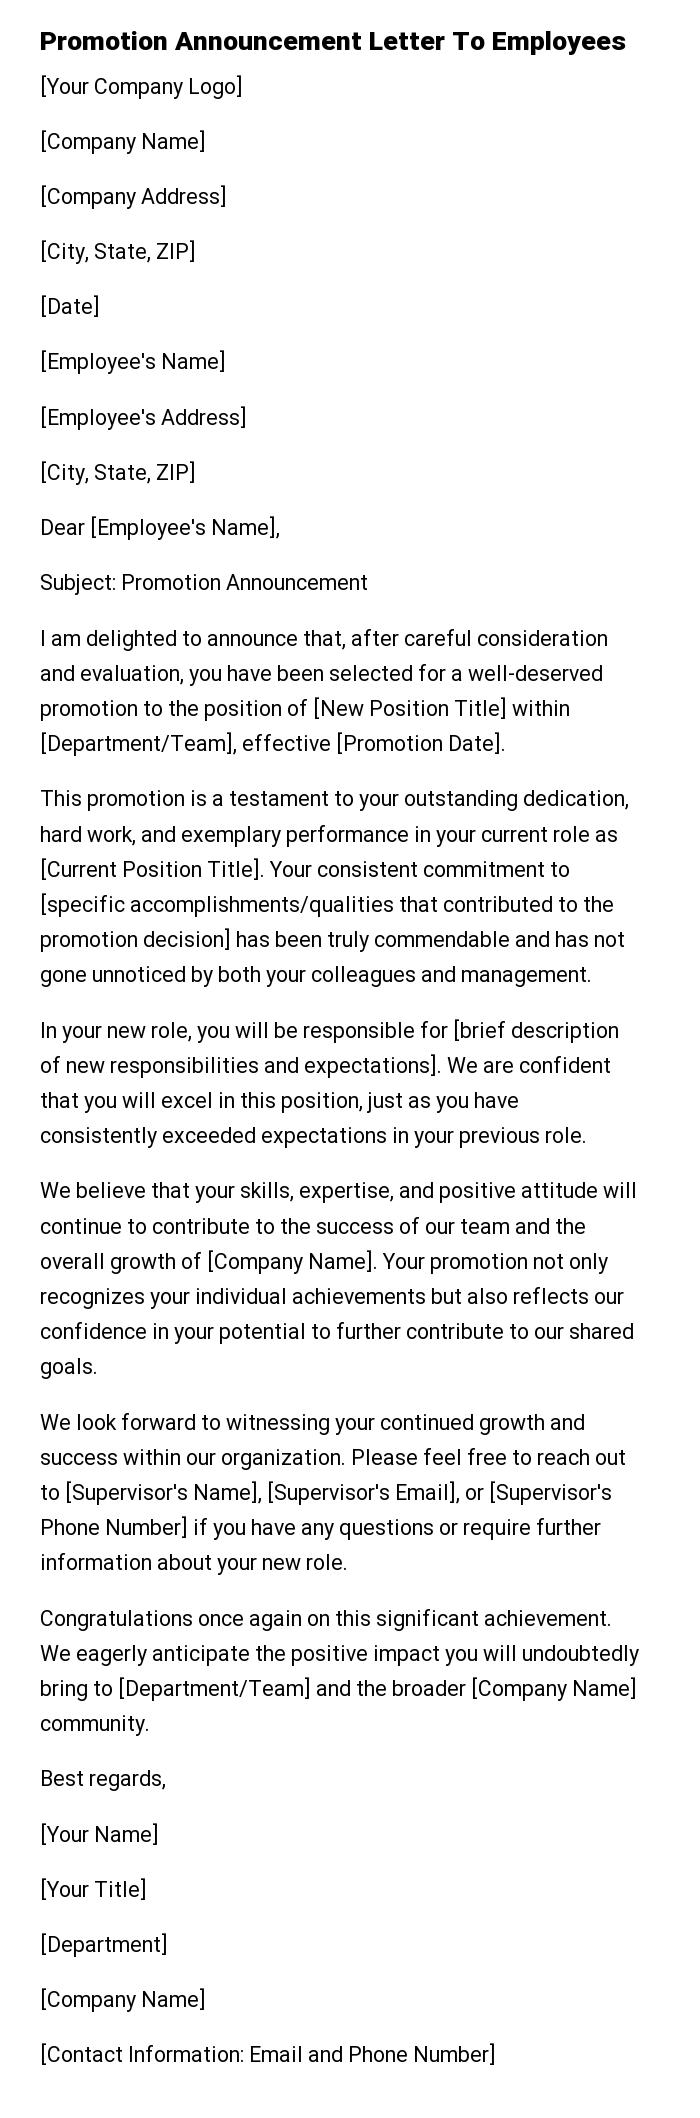 Promotion Announcement Letter To Employees